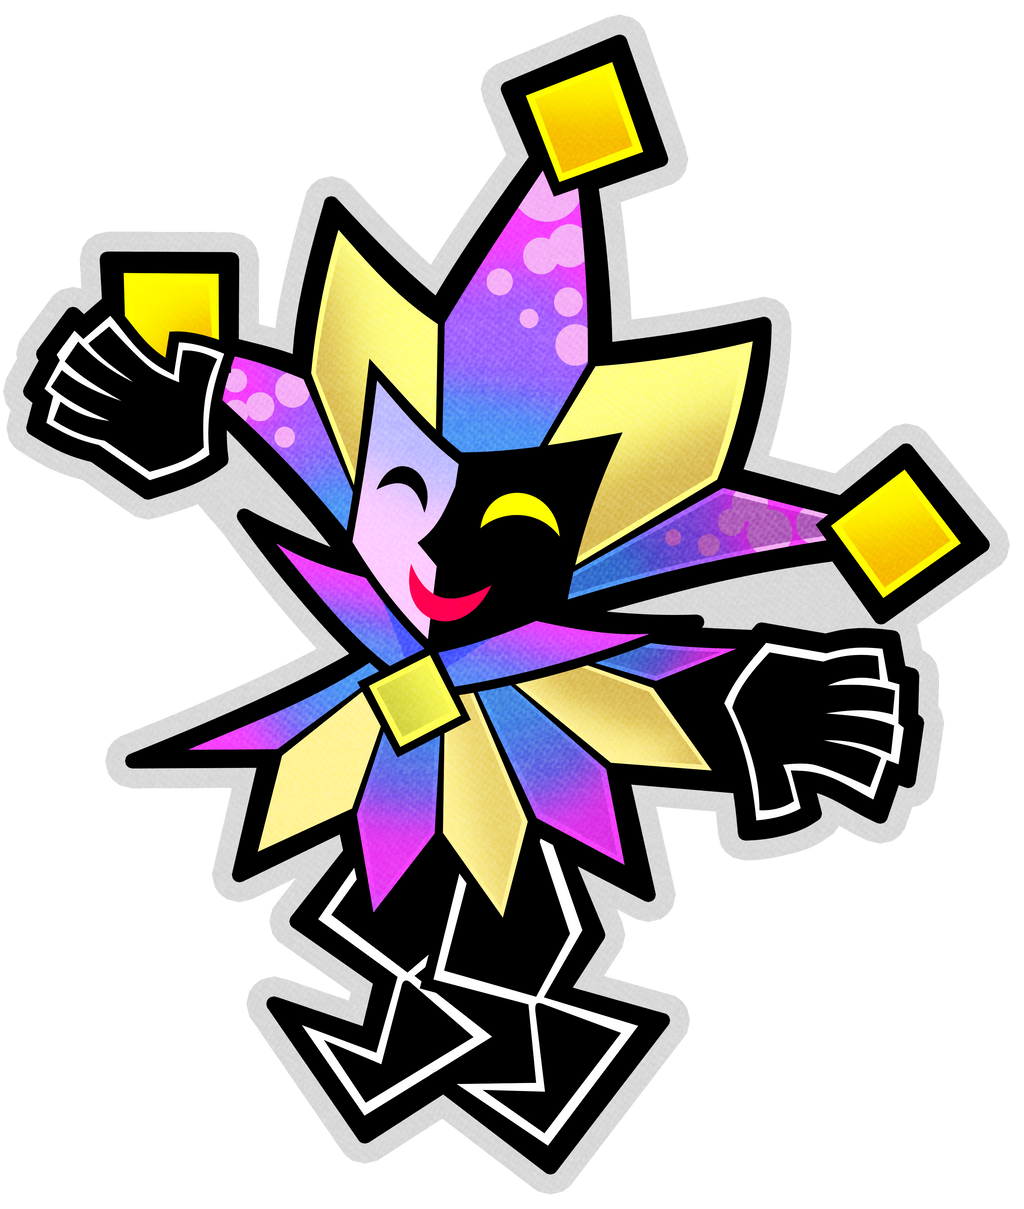 dimentio__modern___super_paper_mario_10th_by_fawfulthegreat64-db9d495.png